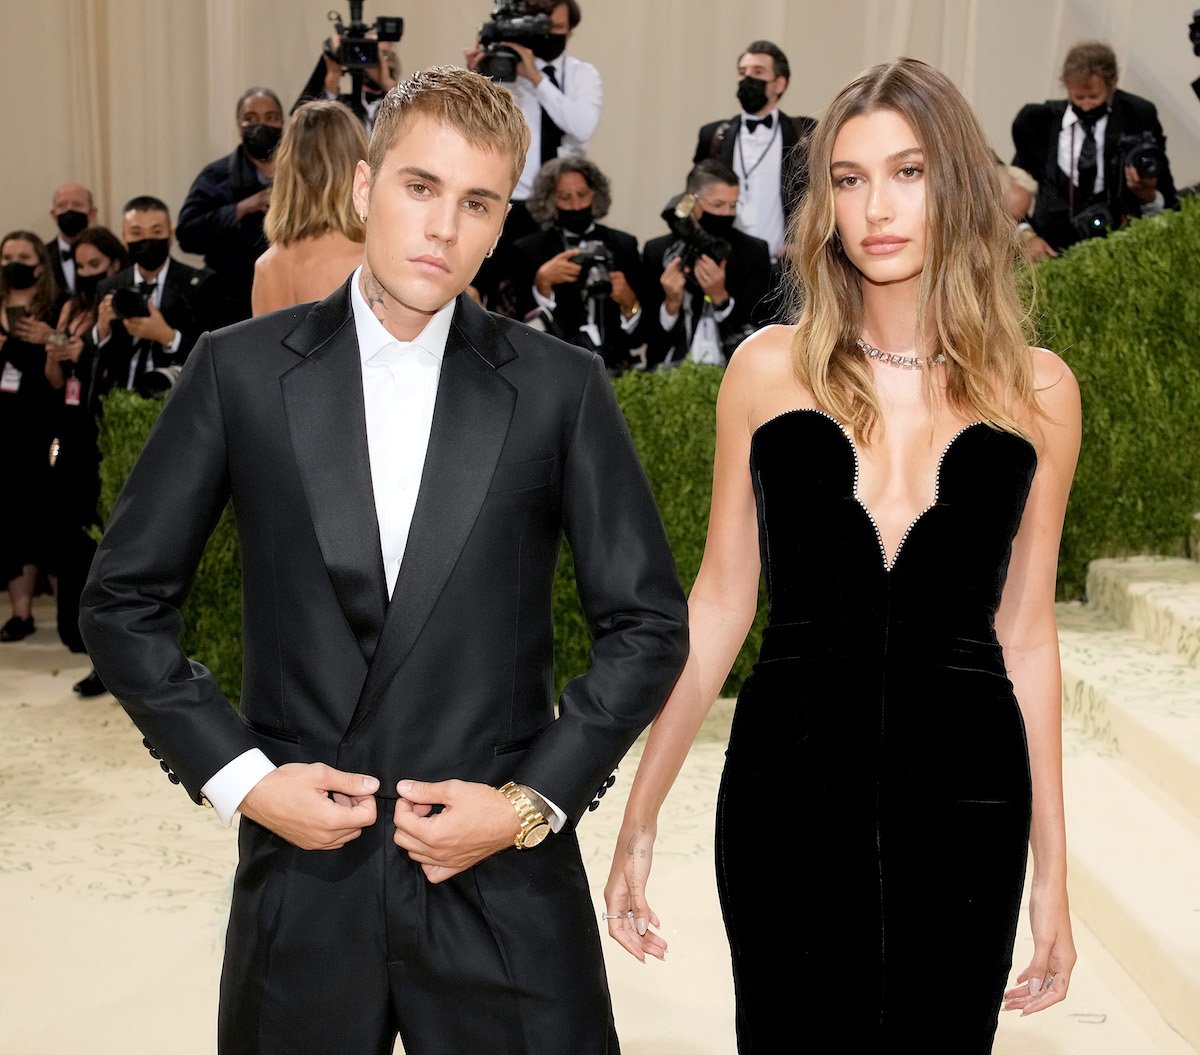 Justin and Hailey Bieber pose in matching black outfits at the 2021 Met Gala.